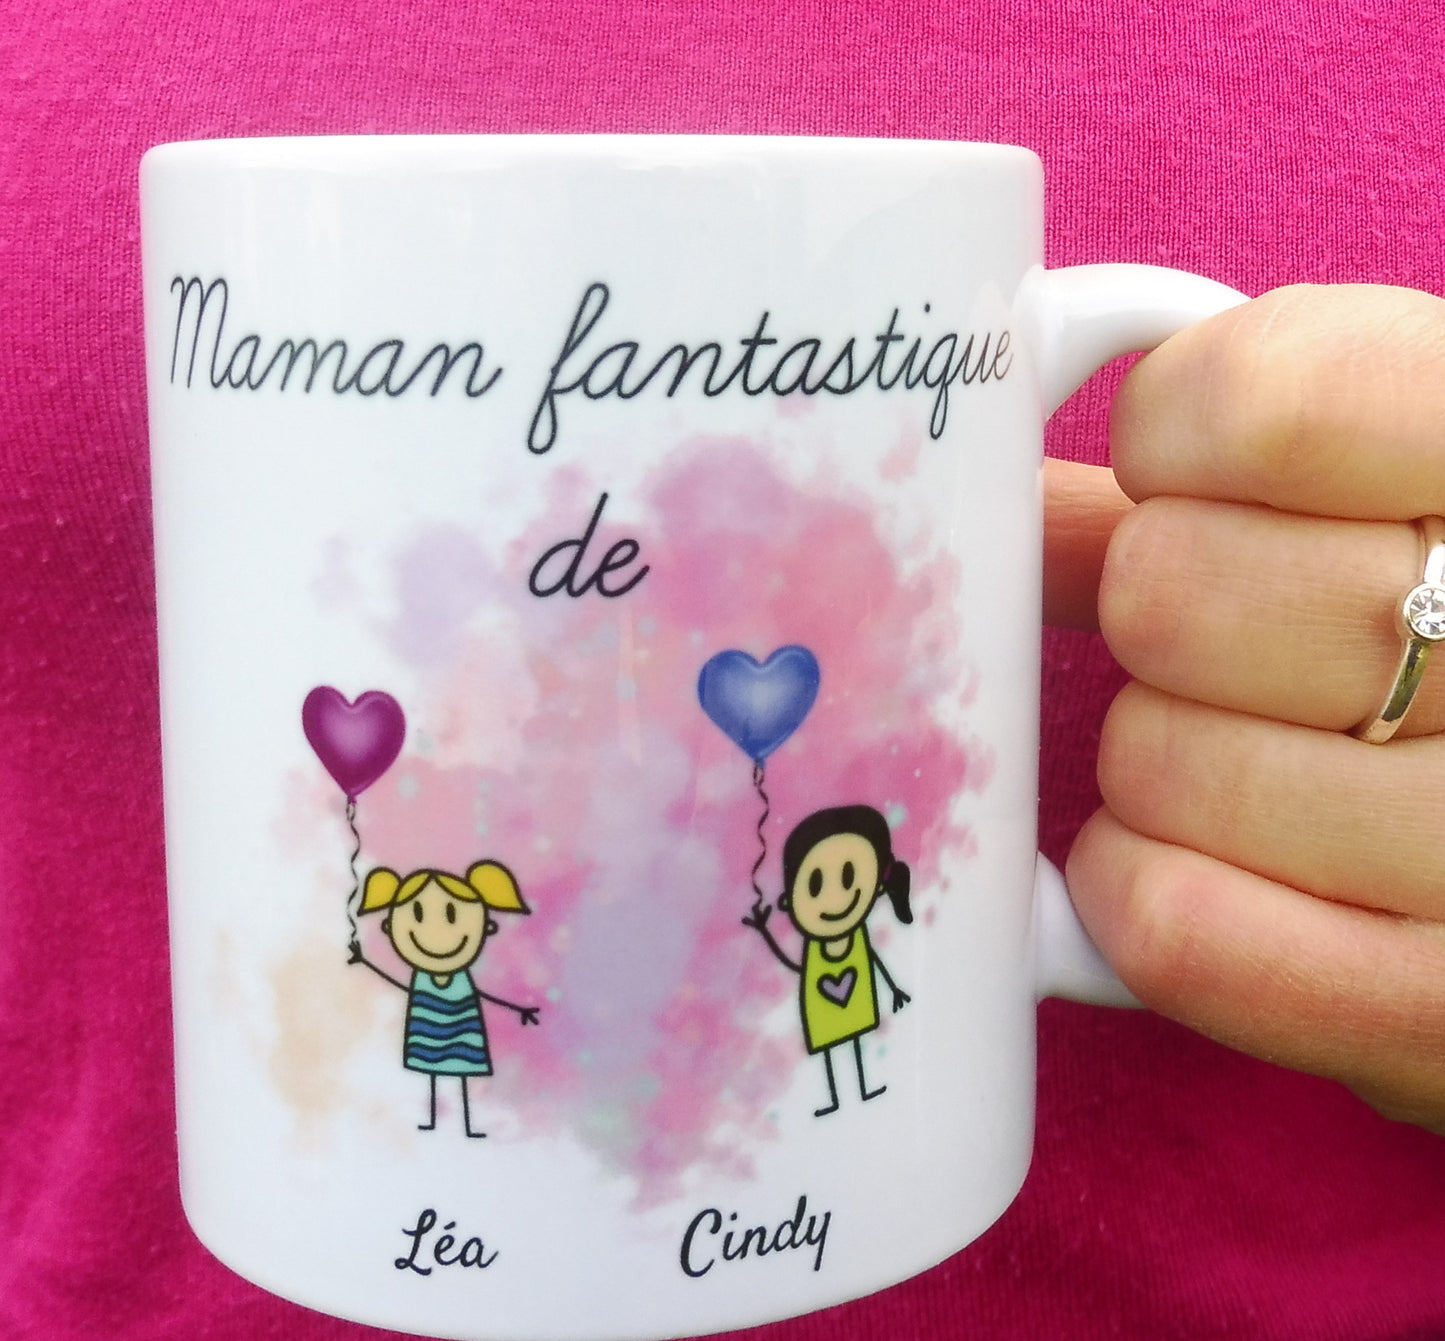 Personalized mug for grandma, mom or aunt and 3 children